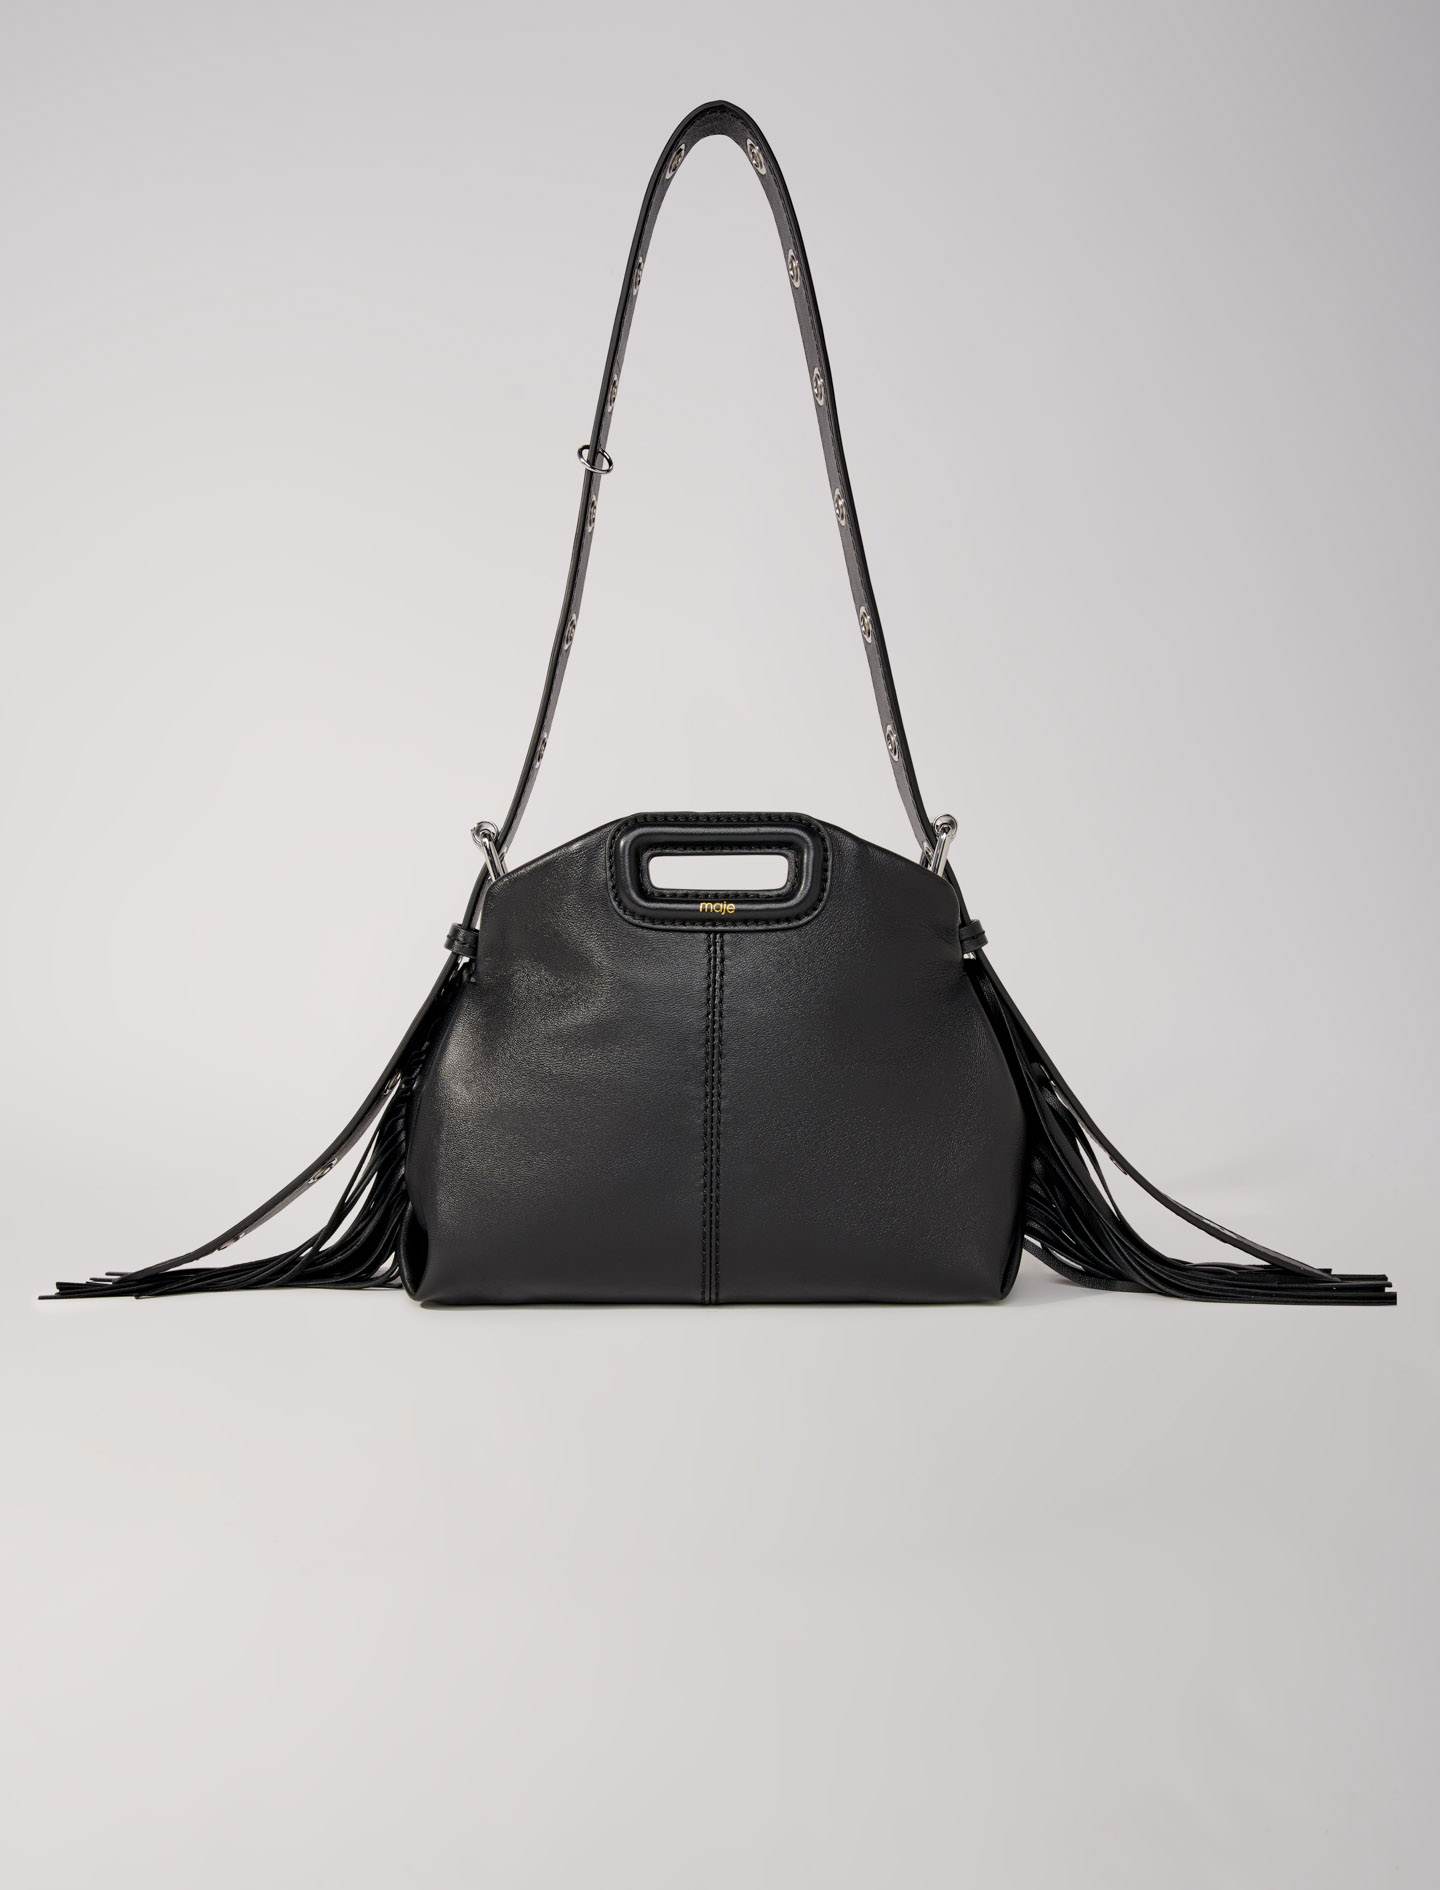 Mixte's polyester Leather: Smooth leather mini Miss M bag for Spring/Summer, size Mixte-All Bags-OS (ONE SIZE), in color Black / Black